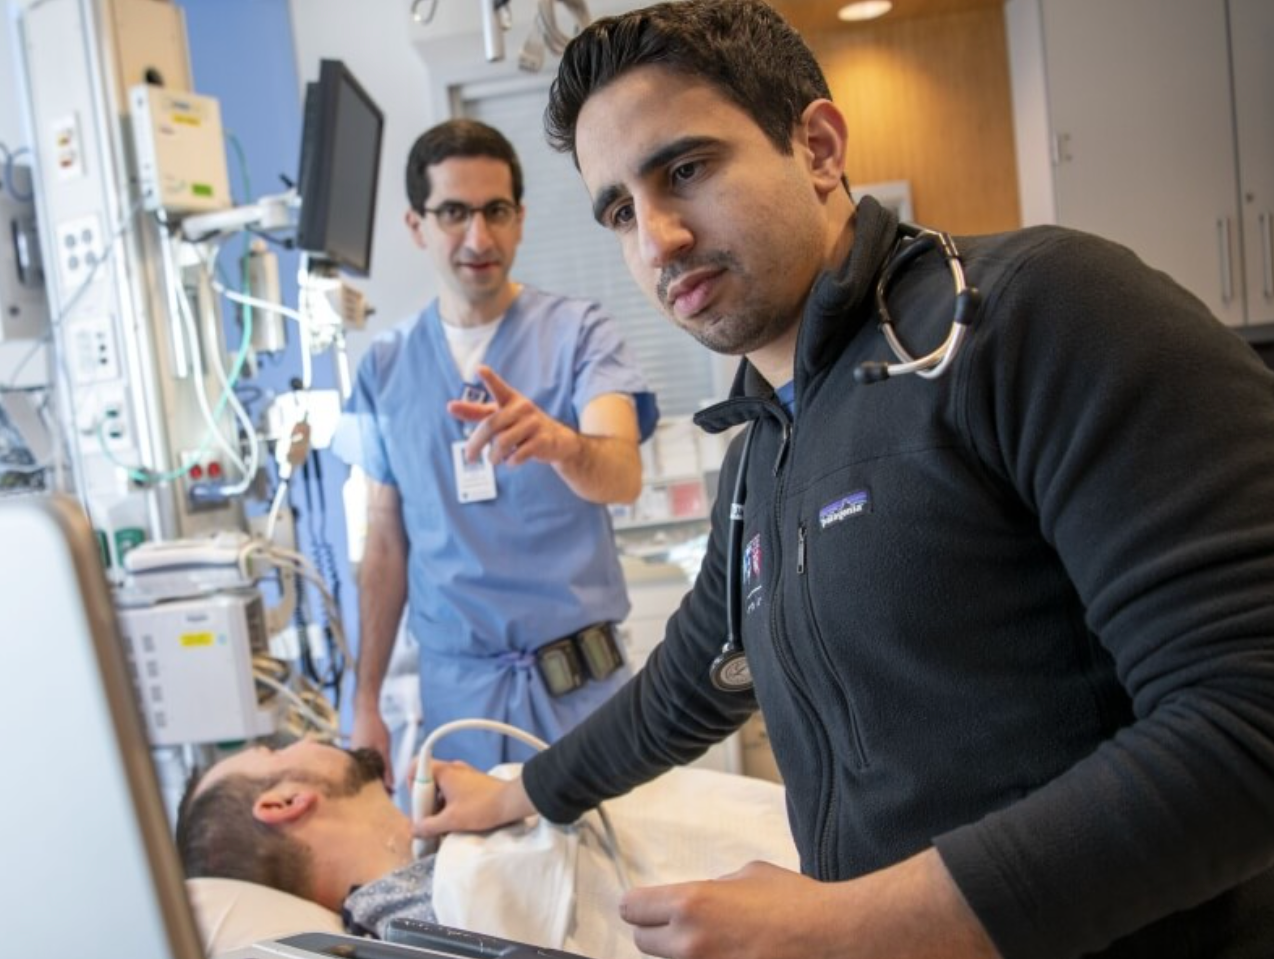 Haitham Alabsi looks at monitor while checking patients vitals in hospital room while another medical staff member in scrubs points at the monitor.